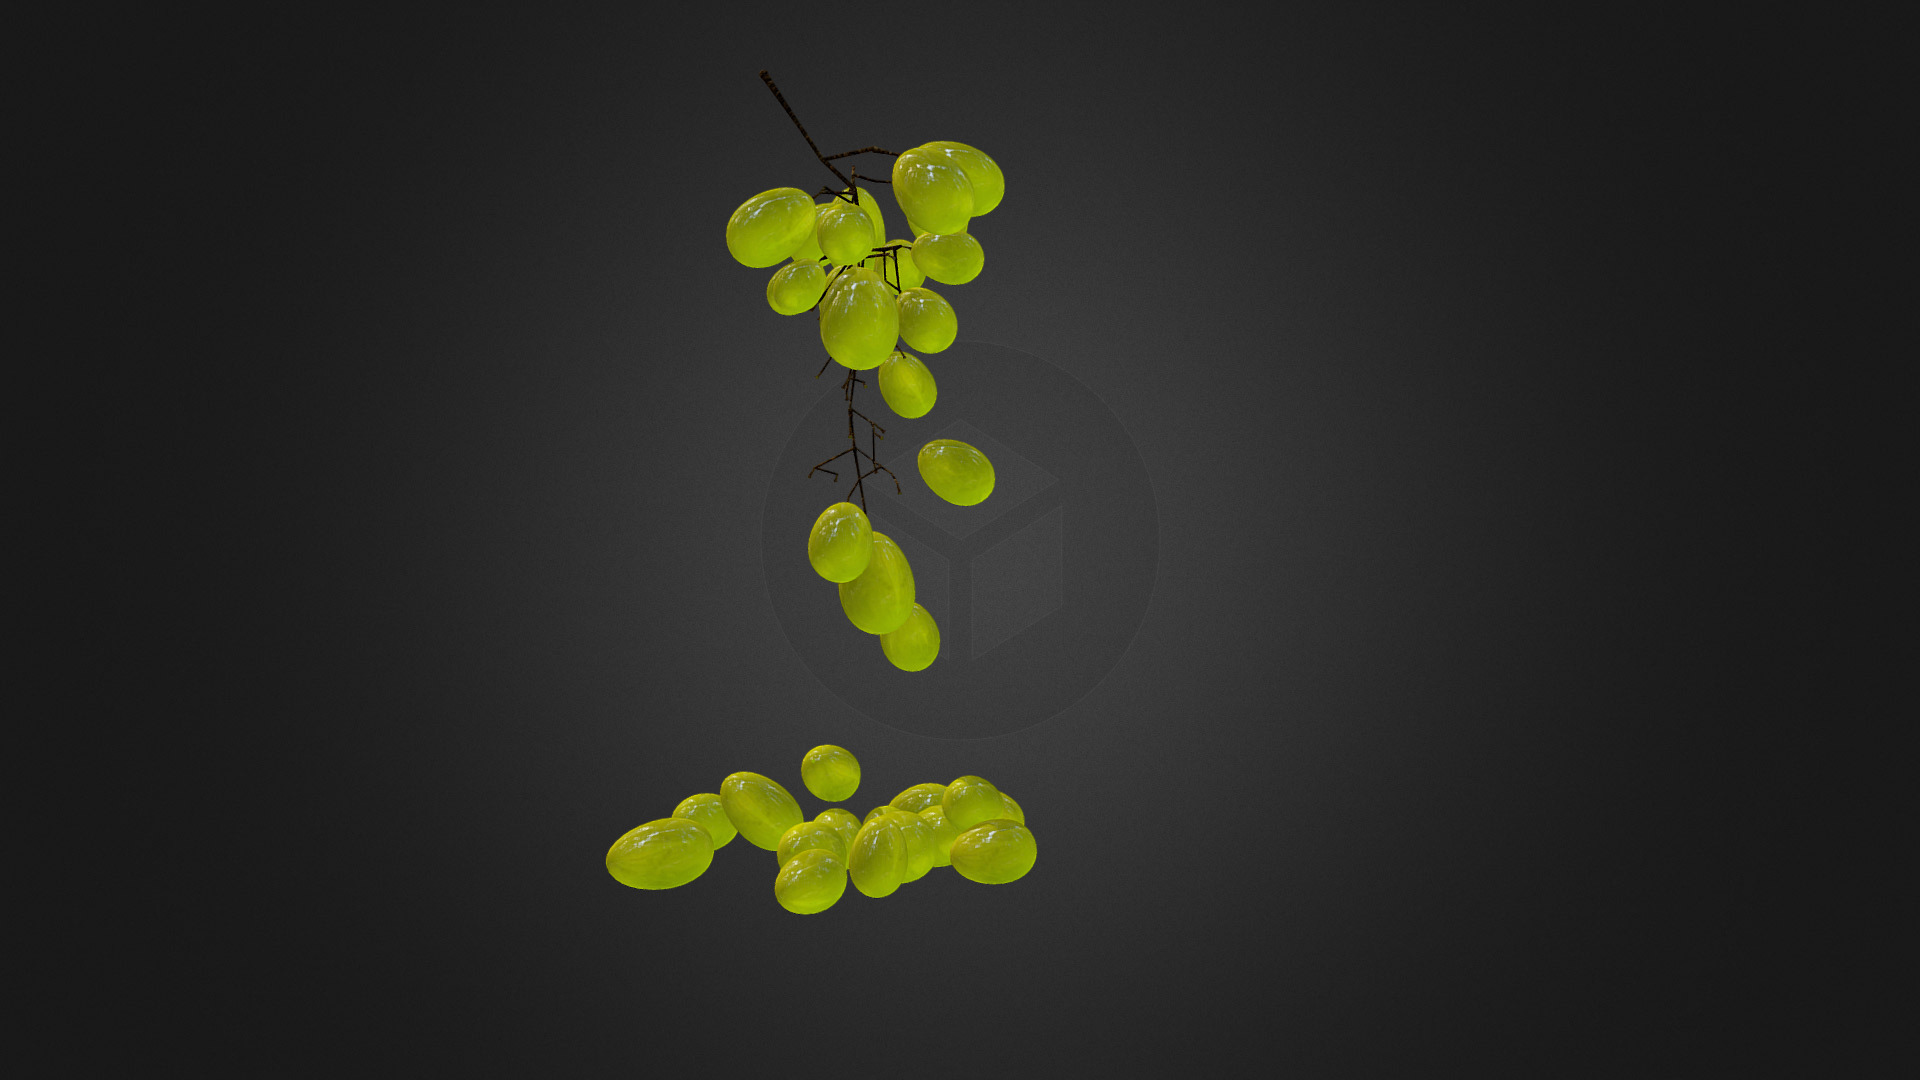 3D model Grape Animation 1 - This is a 3D model of the Grape Animation 1. The 3D model is about a green plant with a black background.